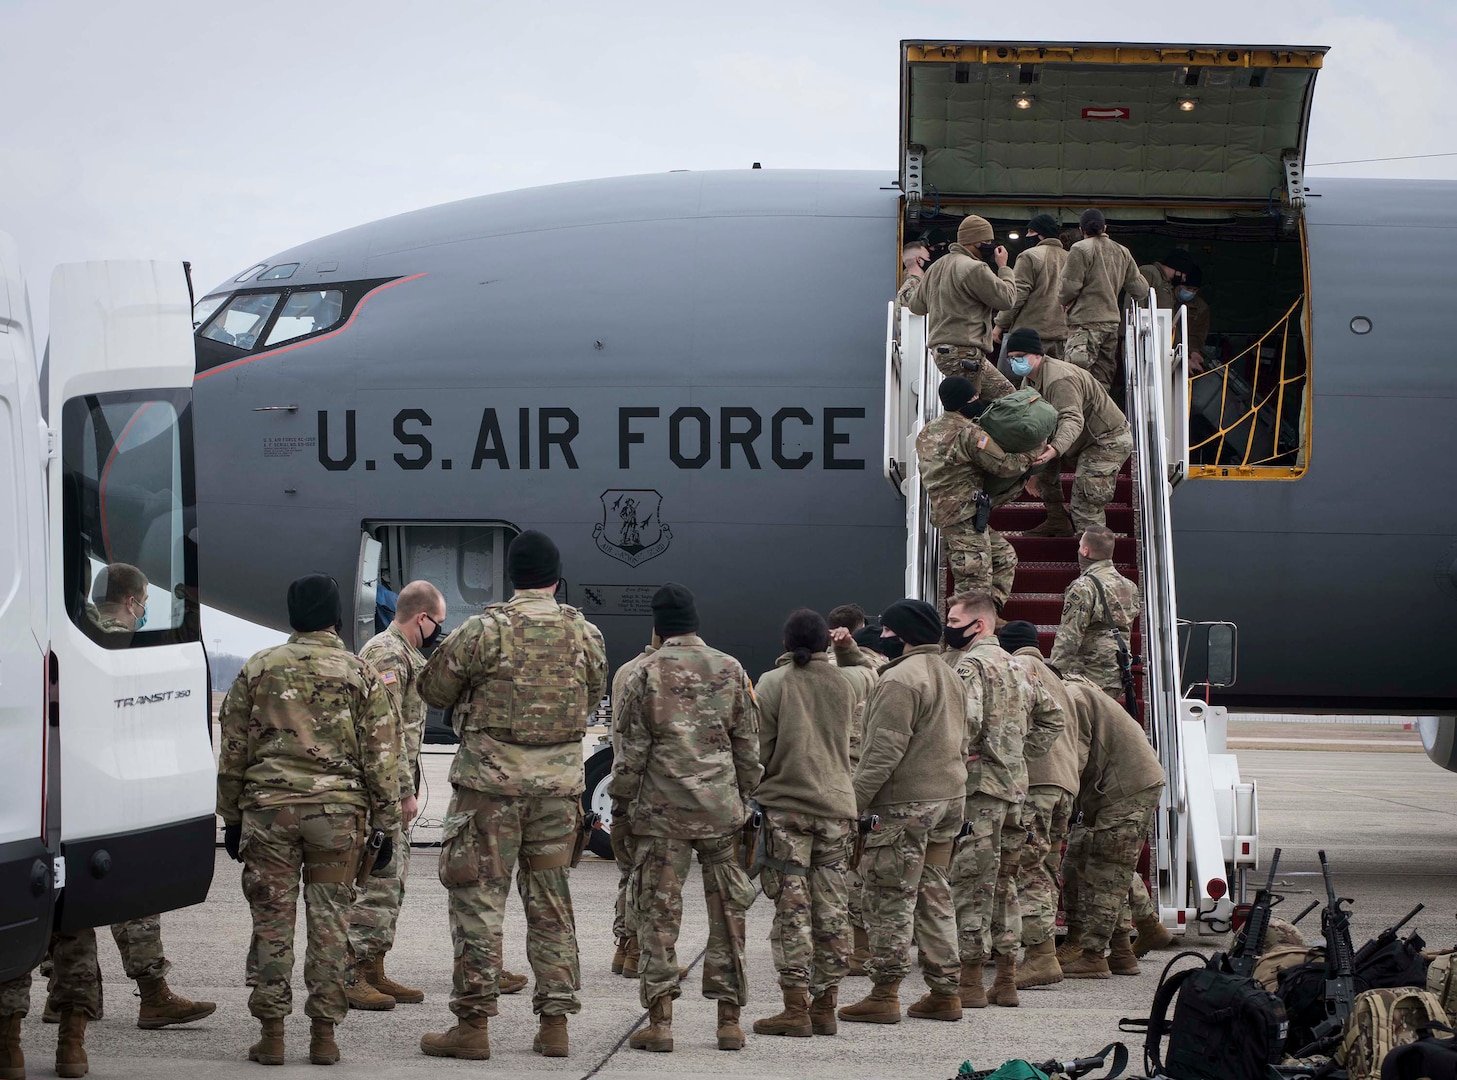 Members of the Tennessee National Guard offload equipment from a KC-135 Stratotanker, assigned to the 134th Air Refueling Wing, Tennessee Air National Guard, upon arrival to Joint Base Andrews, Md., Jan. 15, 2021. National Guard Soldiers and Airmen from several states have traveled to Washington, D.C., to support federal and D.C. authorities leading up to the 59th presidential inauguration.